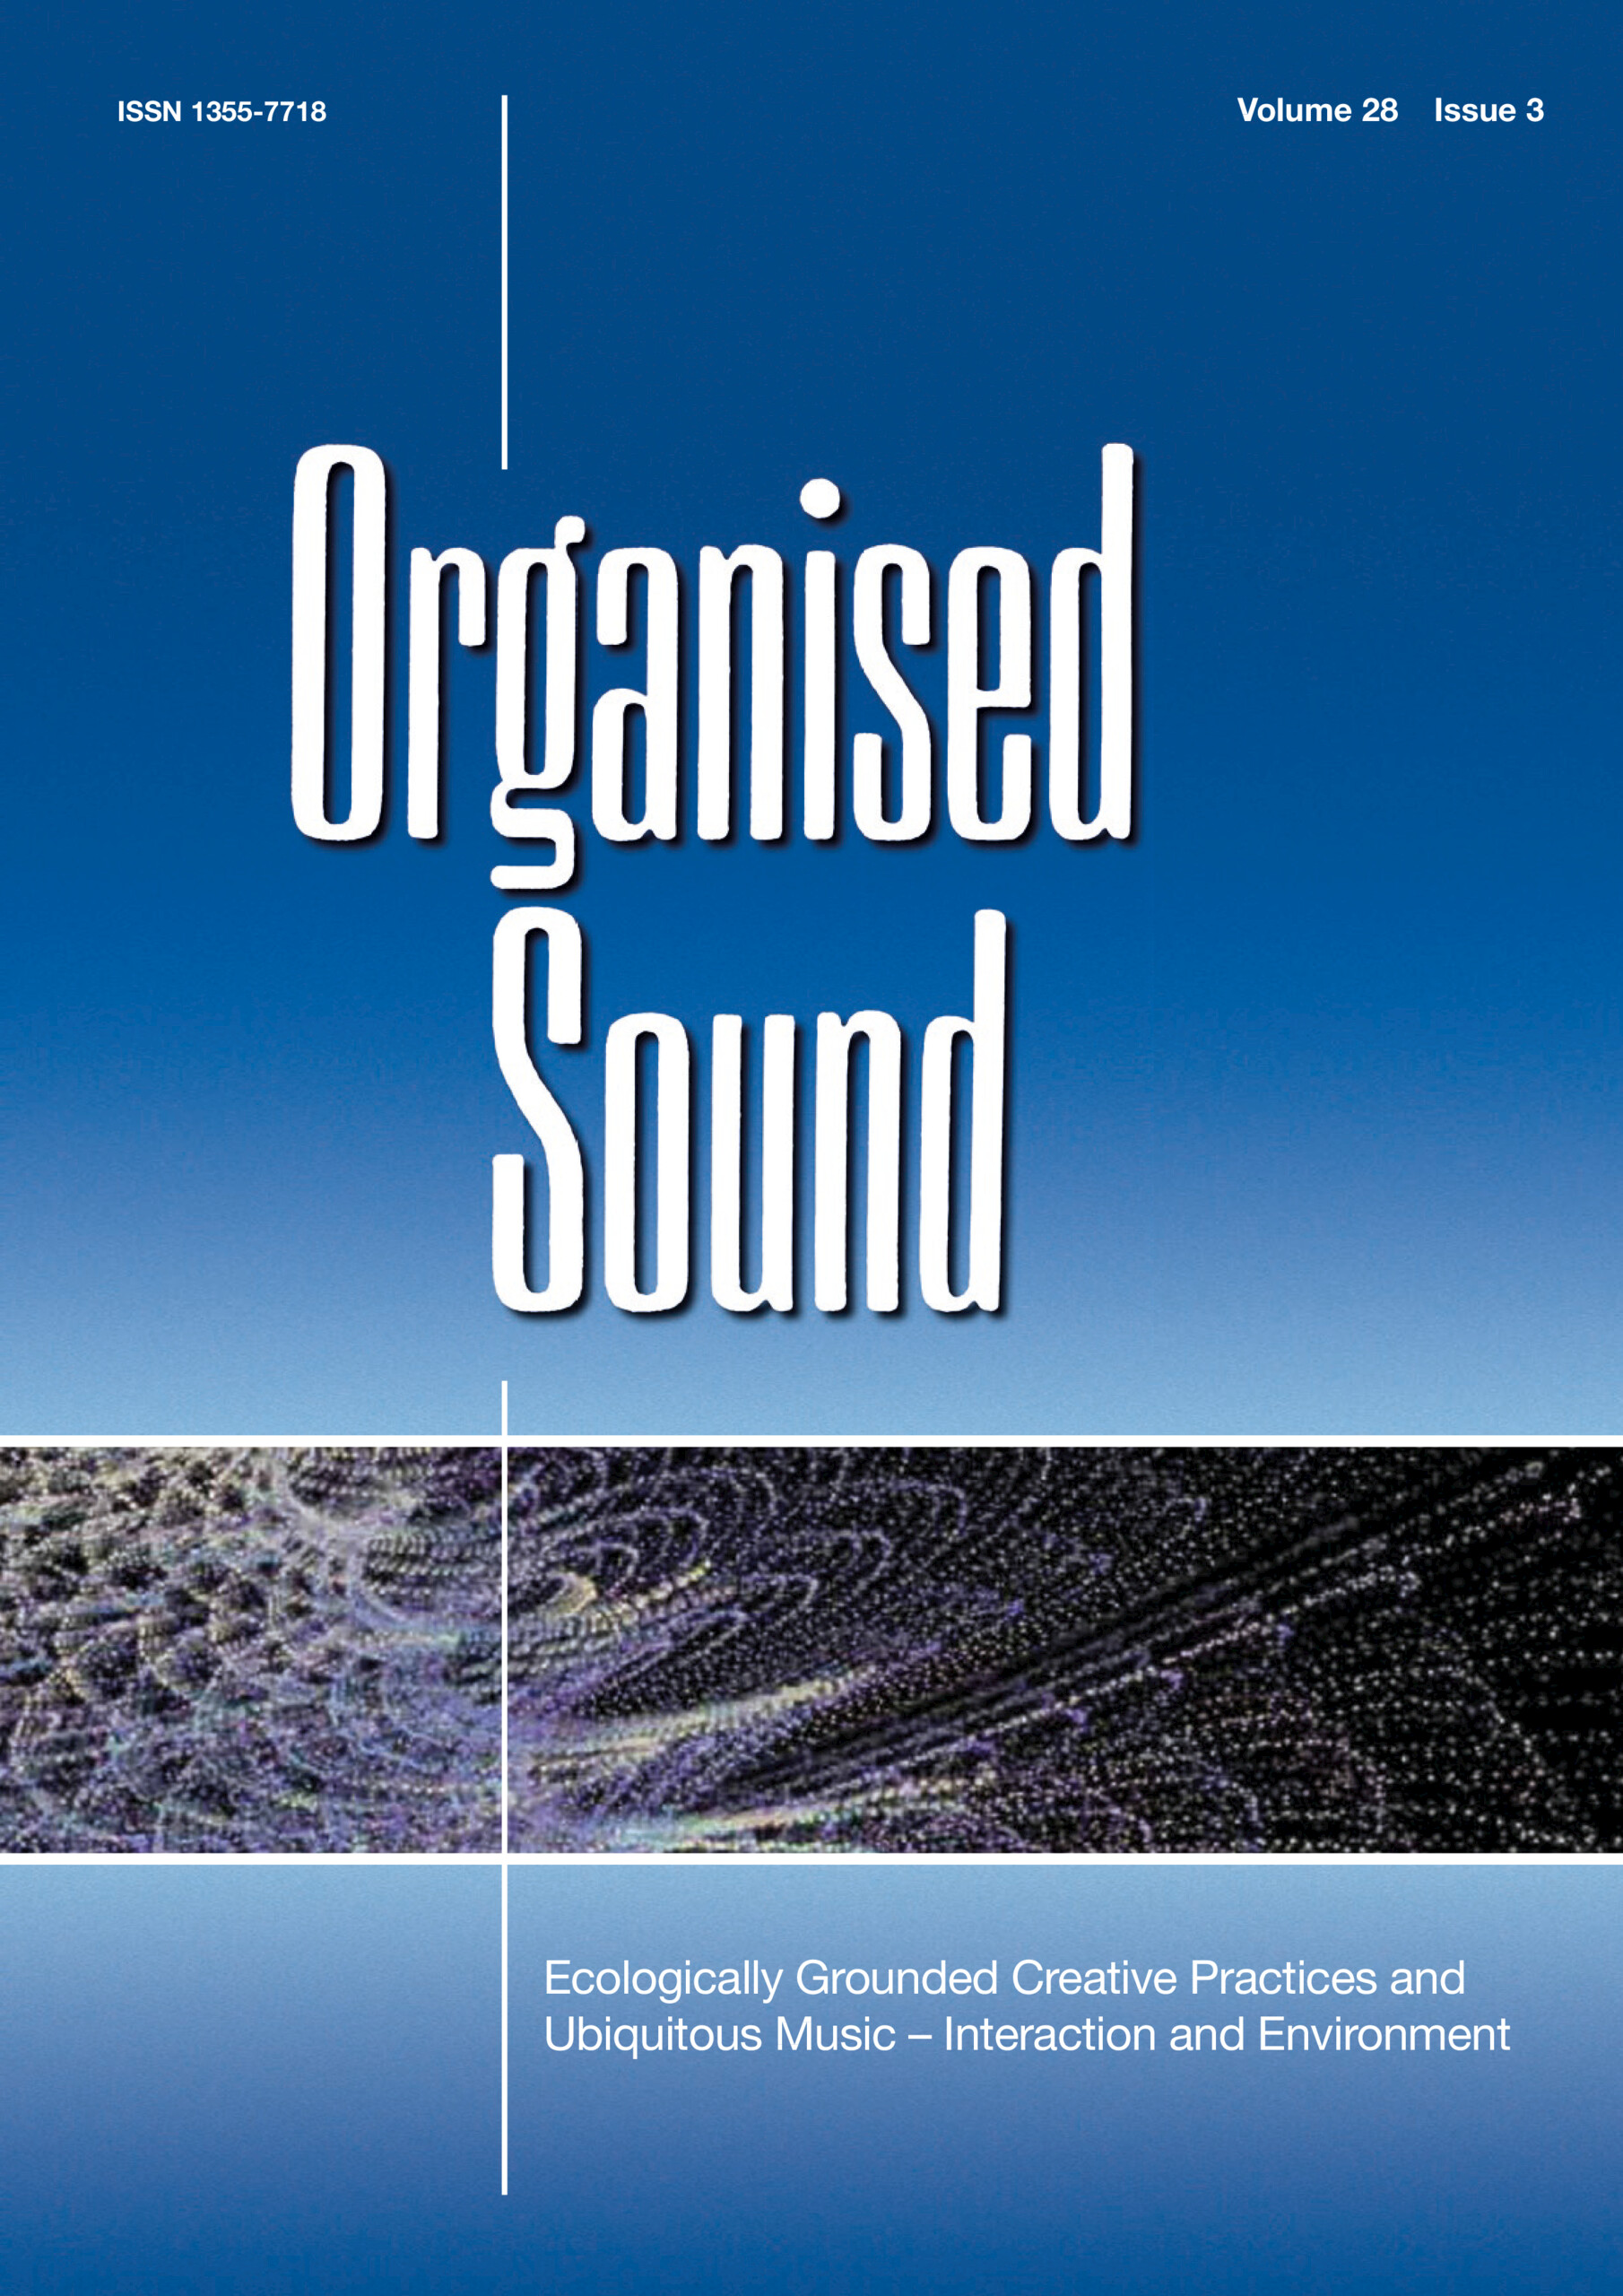 The cover of Organized Sound 26(3)